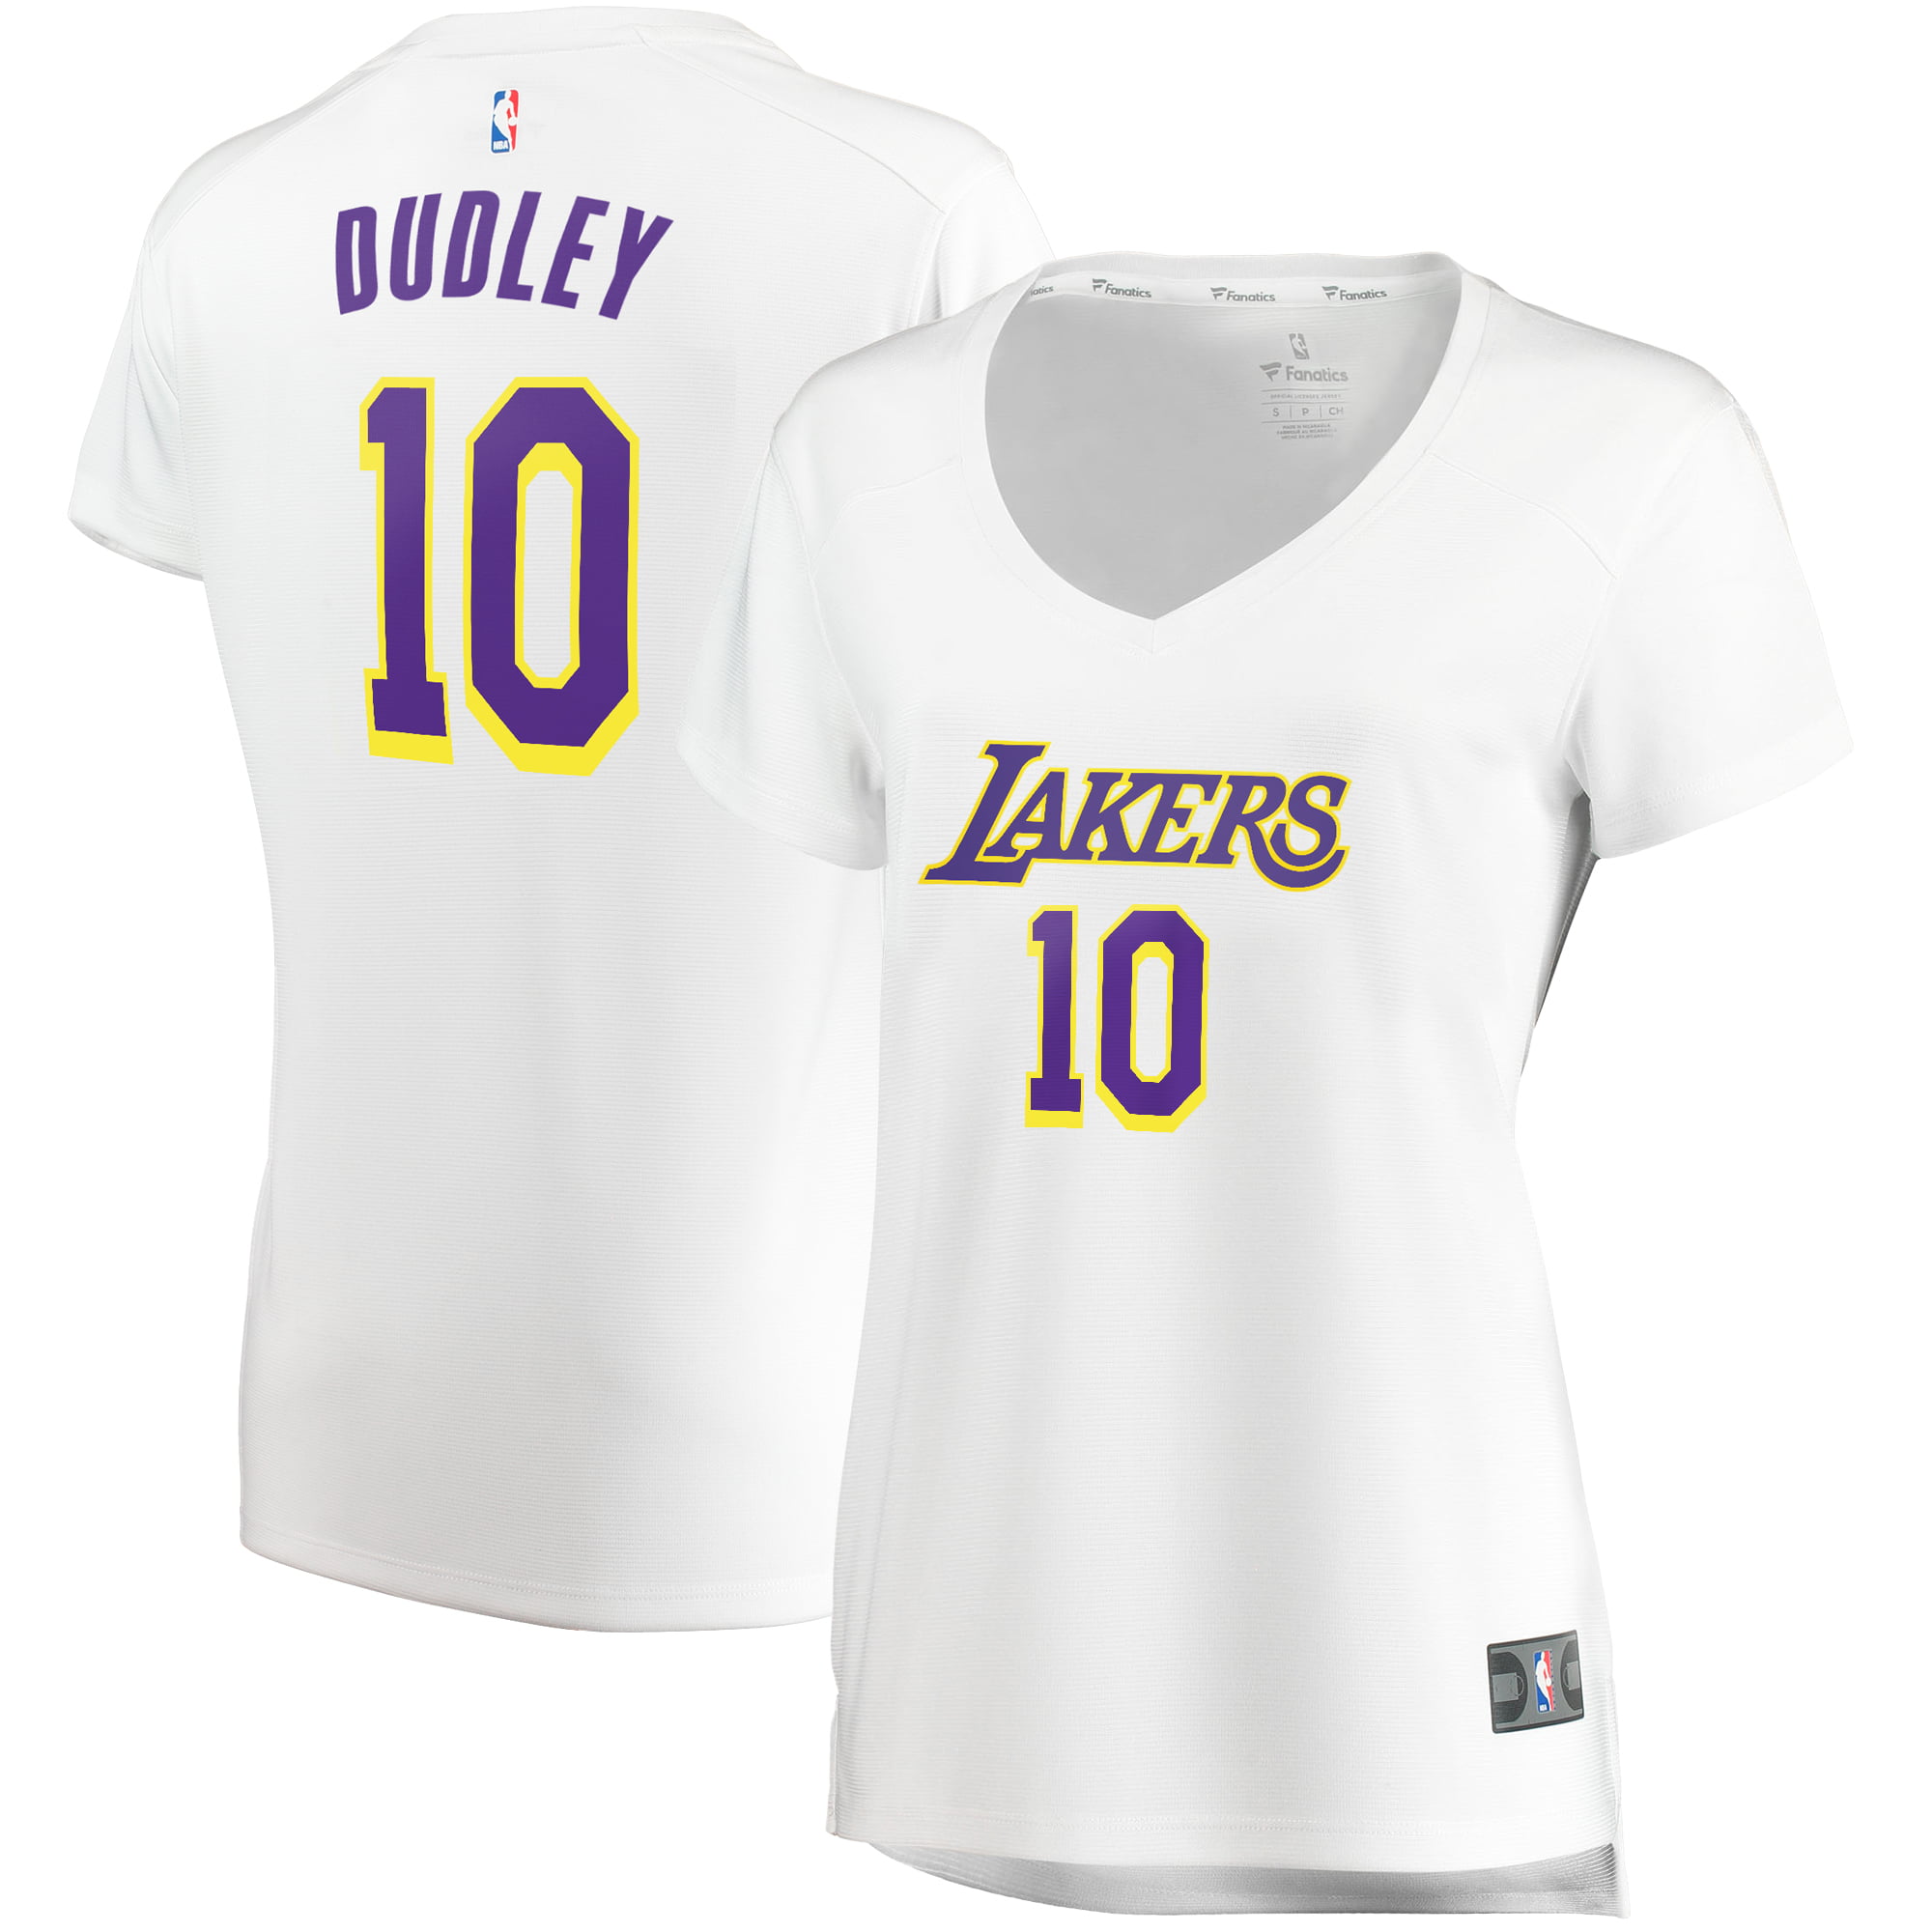 jared dudley jersey